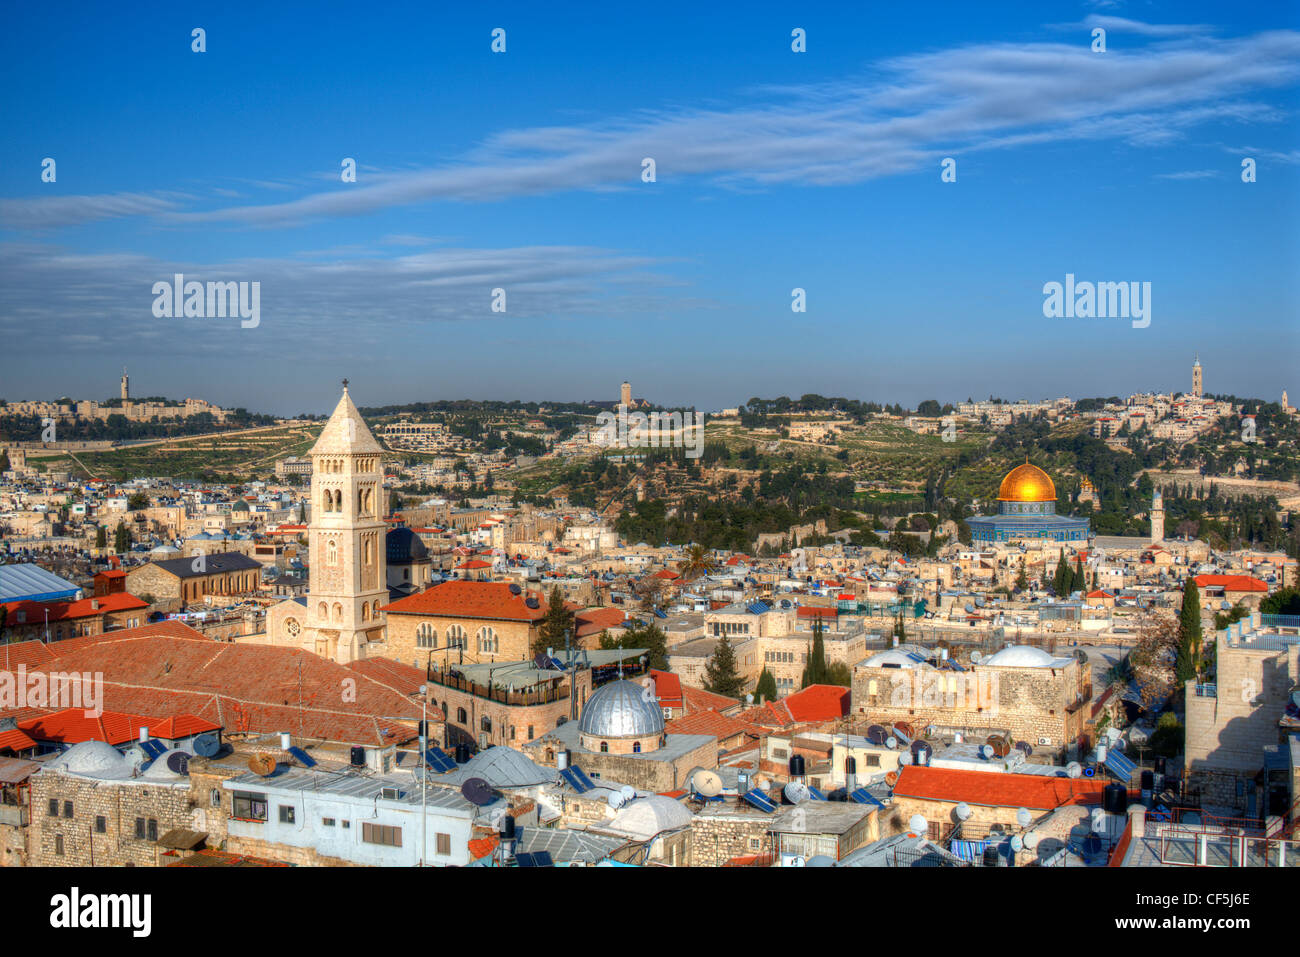 Aerial view the Old City of Jerusalem, Israel. Stock Photo